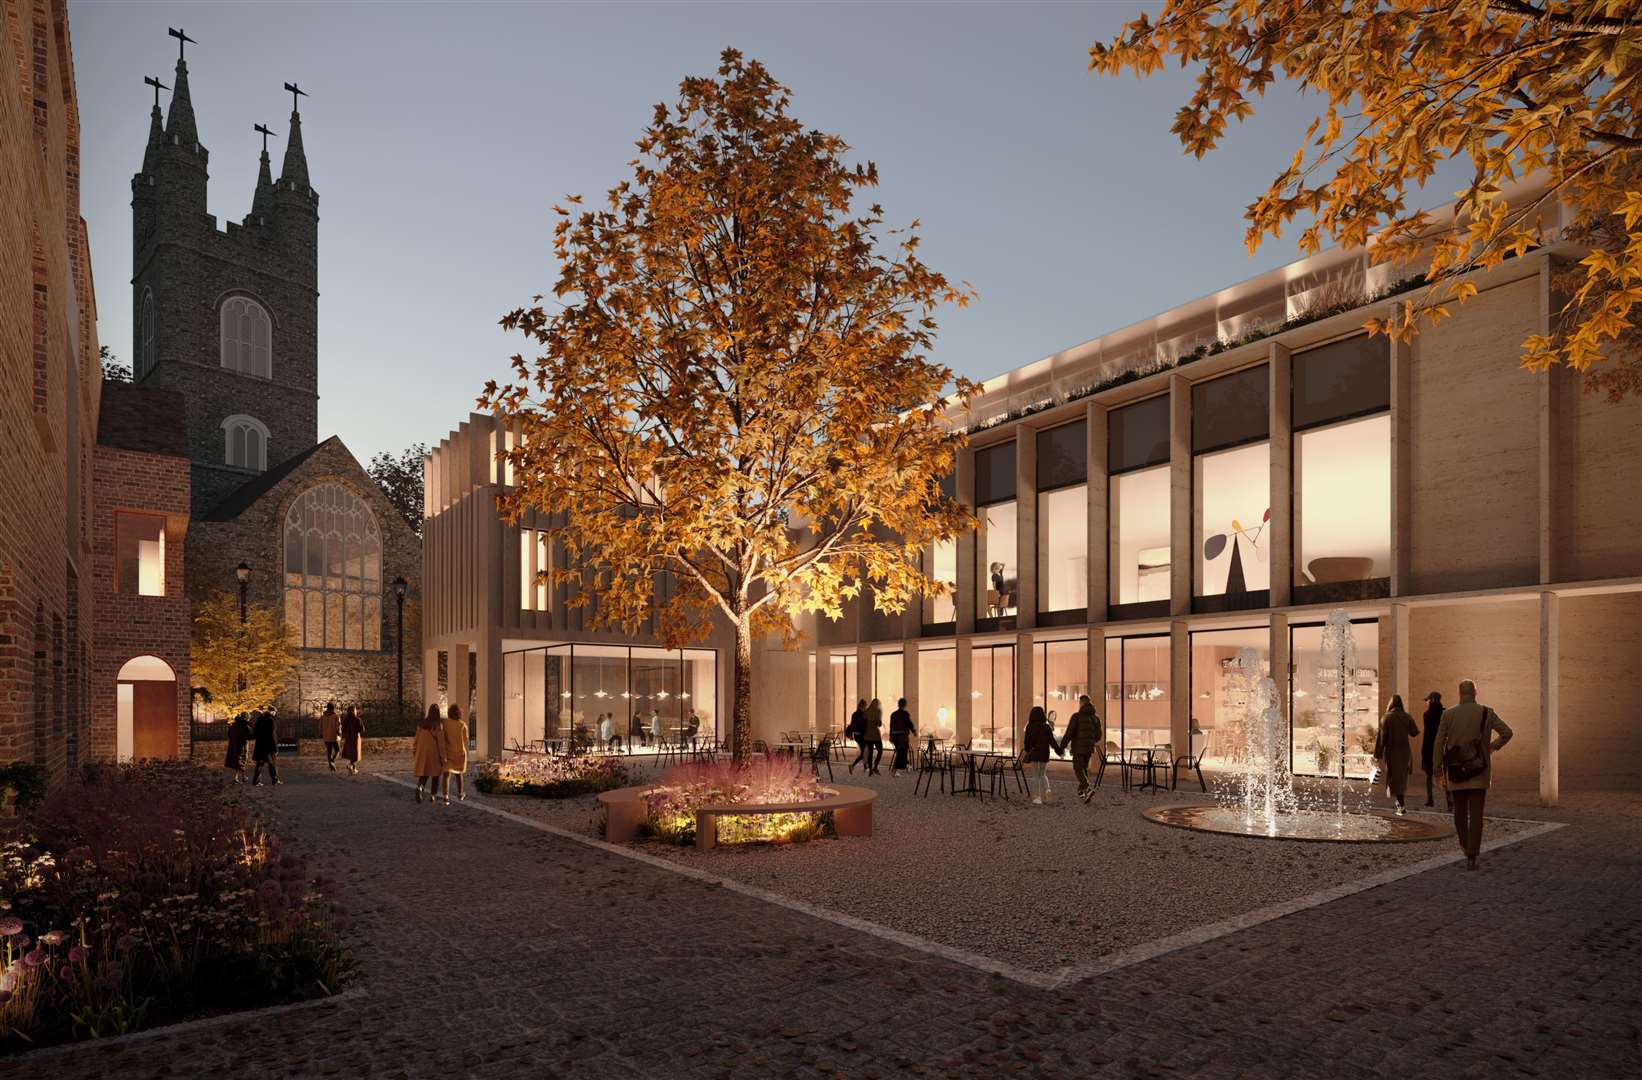 The development will open up views of St Mary's church, bosses say. Picture: MICA